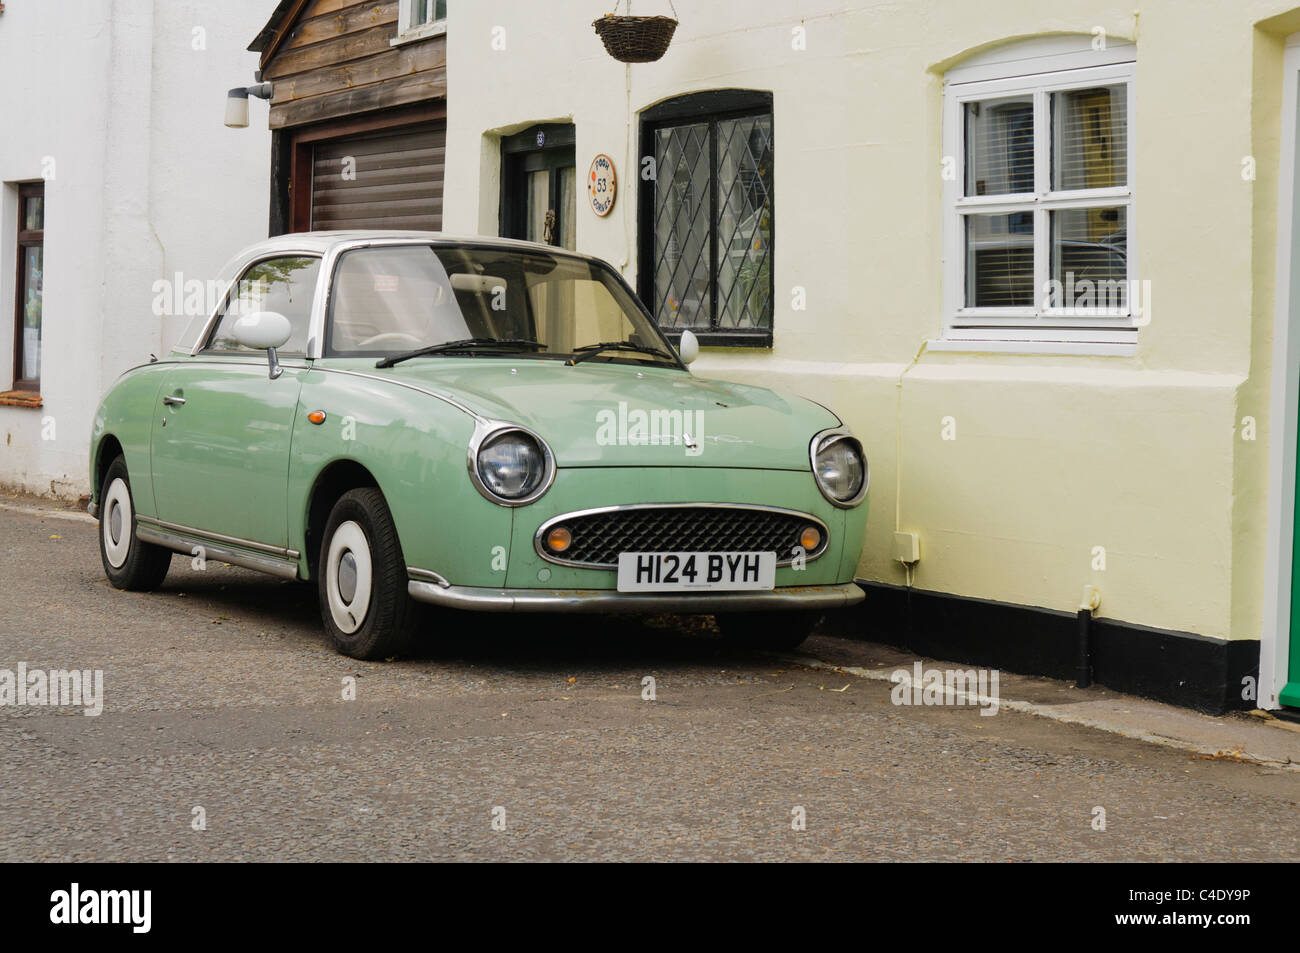 Nissan Figaro parked beside a house Stock Photo